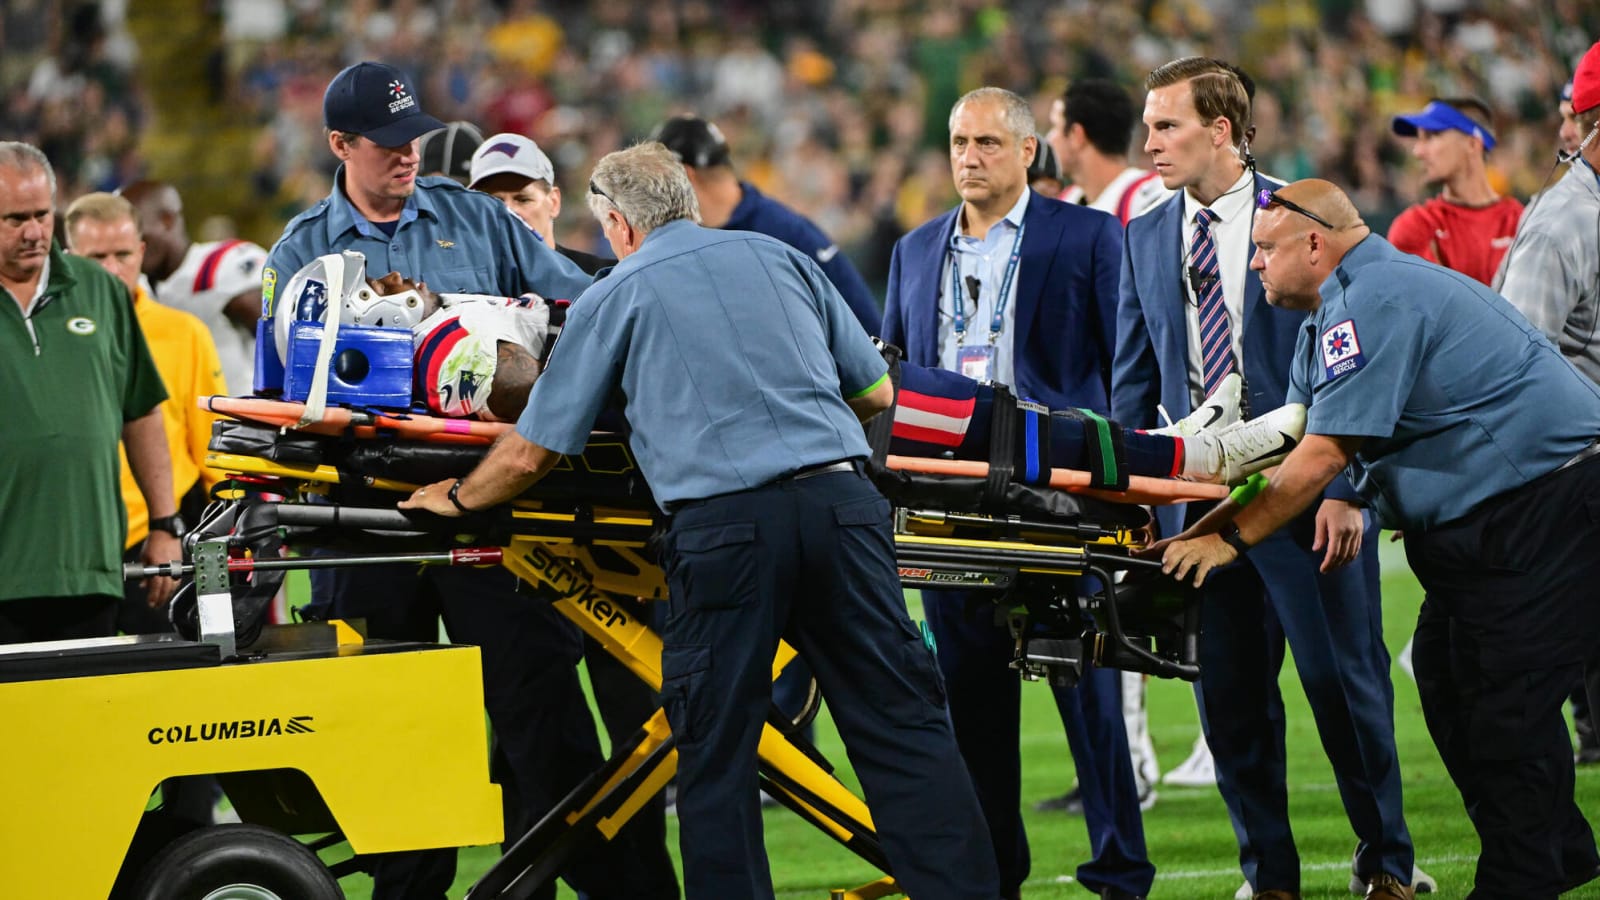 Patriots-Packers game suspended after rookie stretchered off